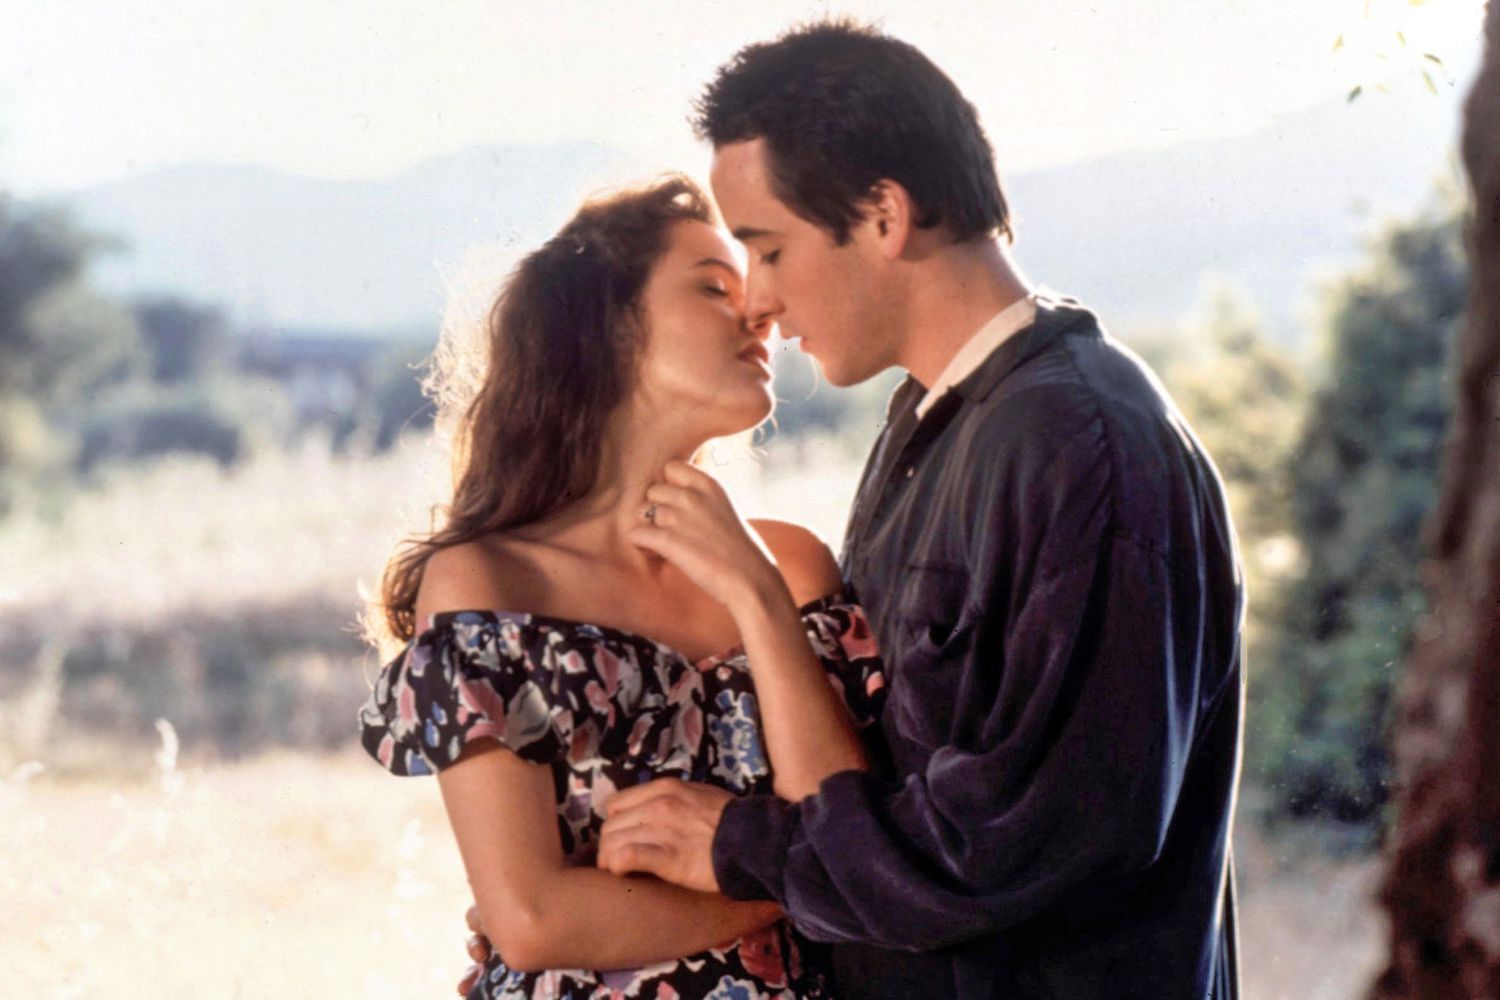 SAY ANYTHING, from left: Ione Skye, John Cusack